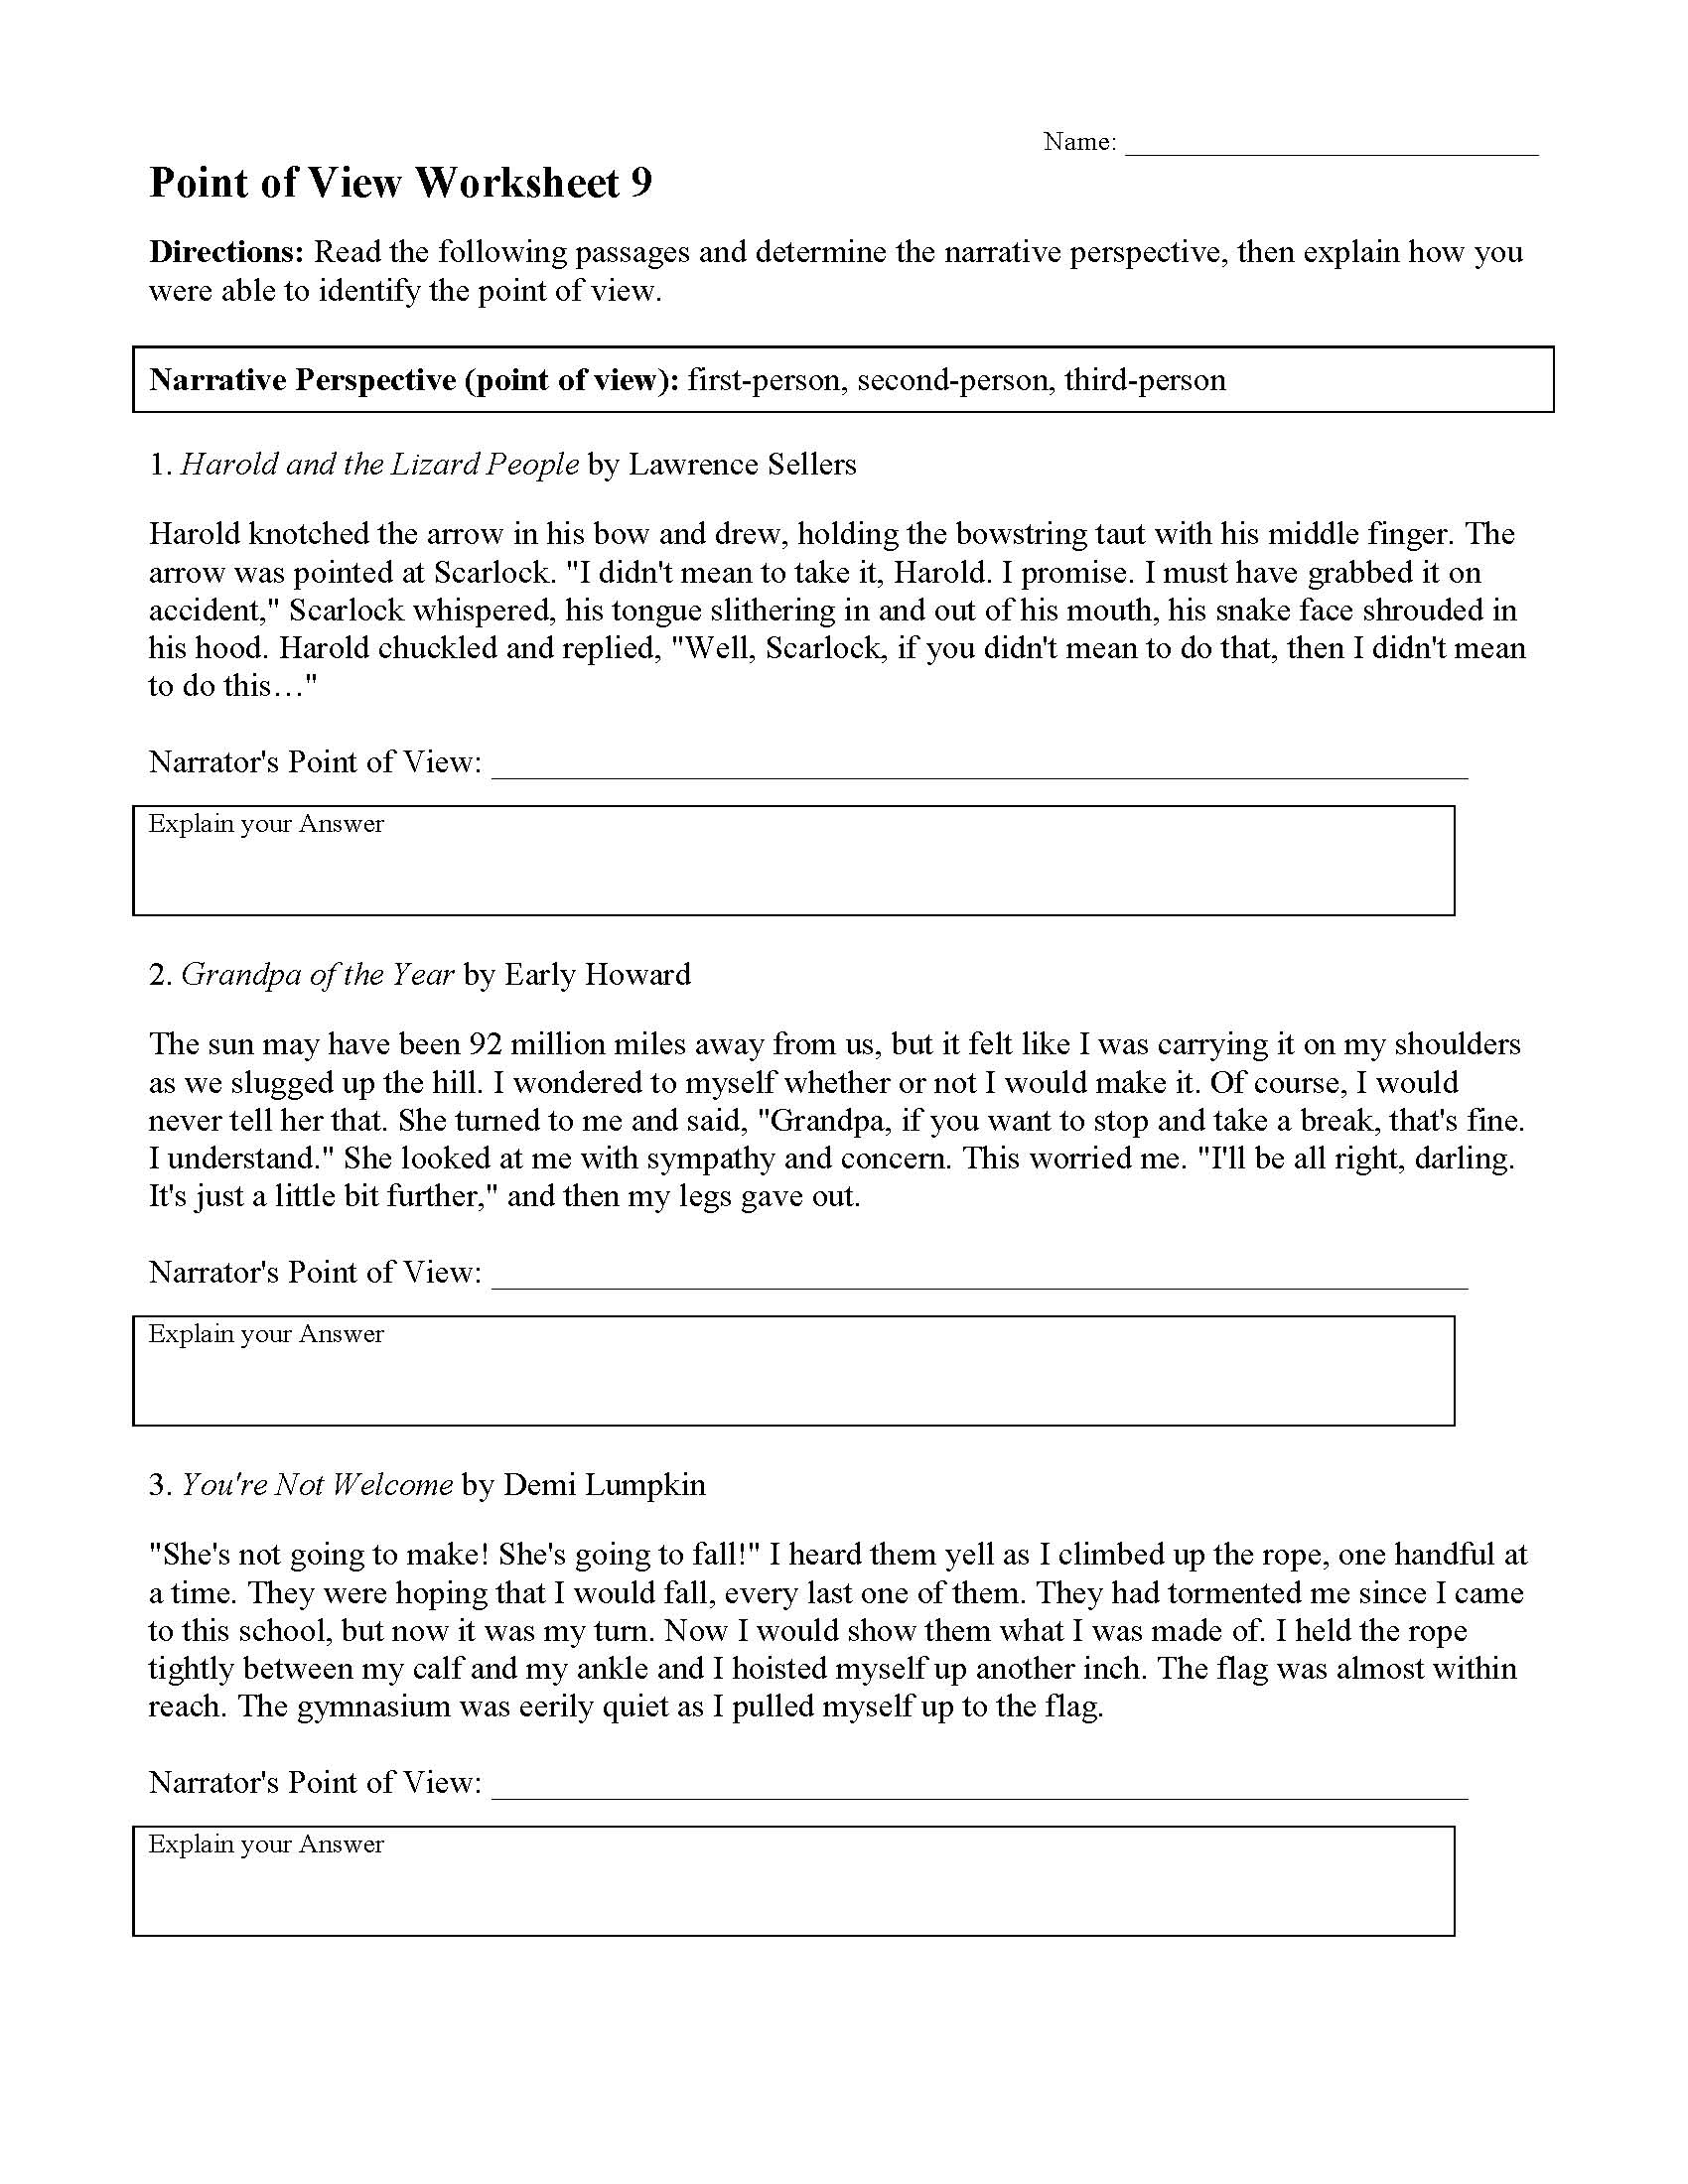 point-of-view-worksheet-9-preview